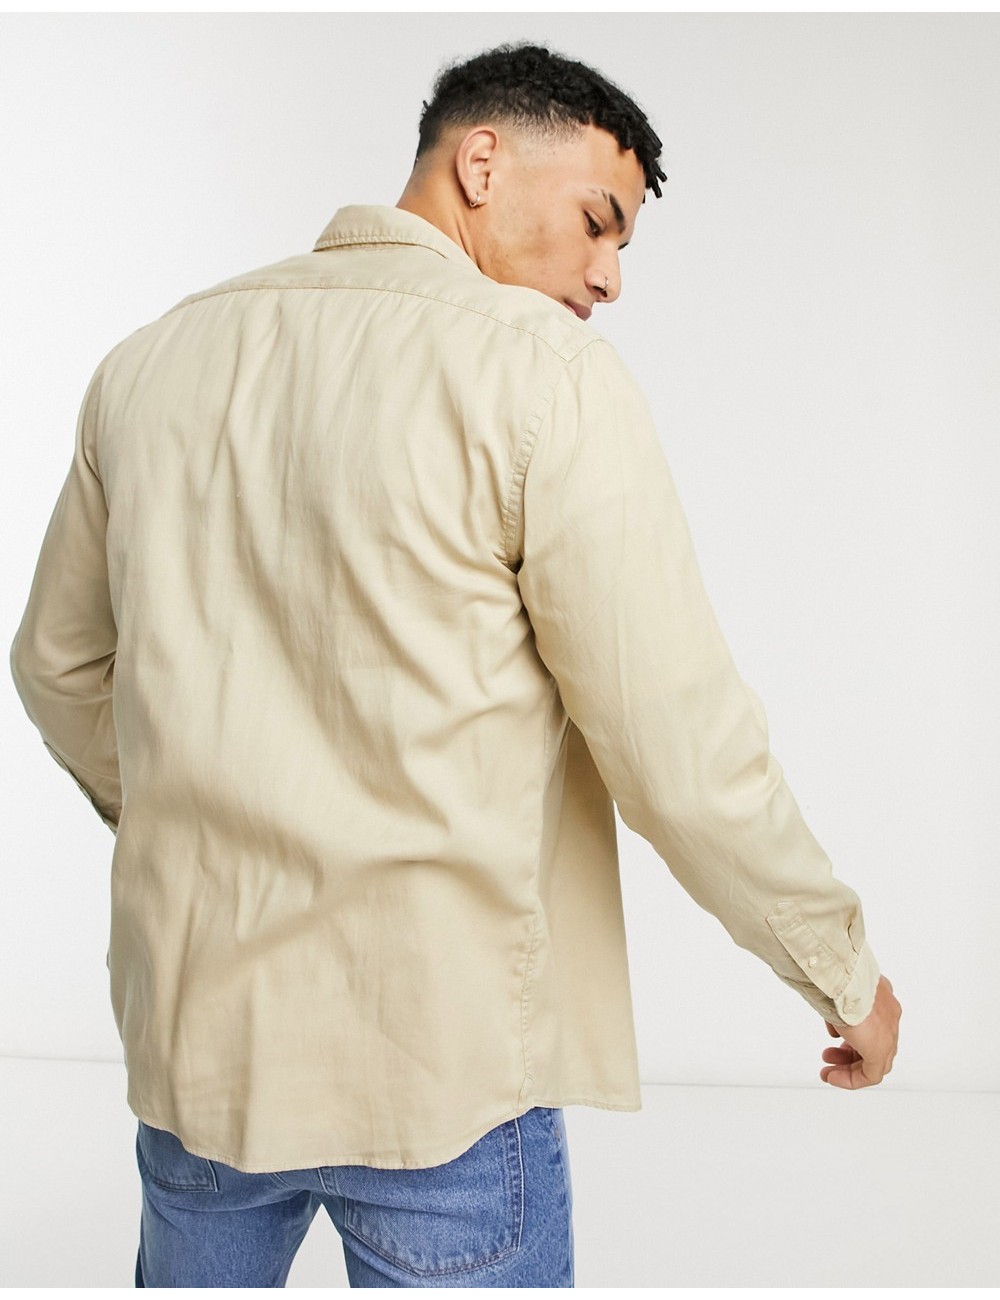 Selected Homme shirt in beige